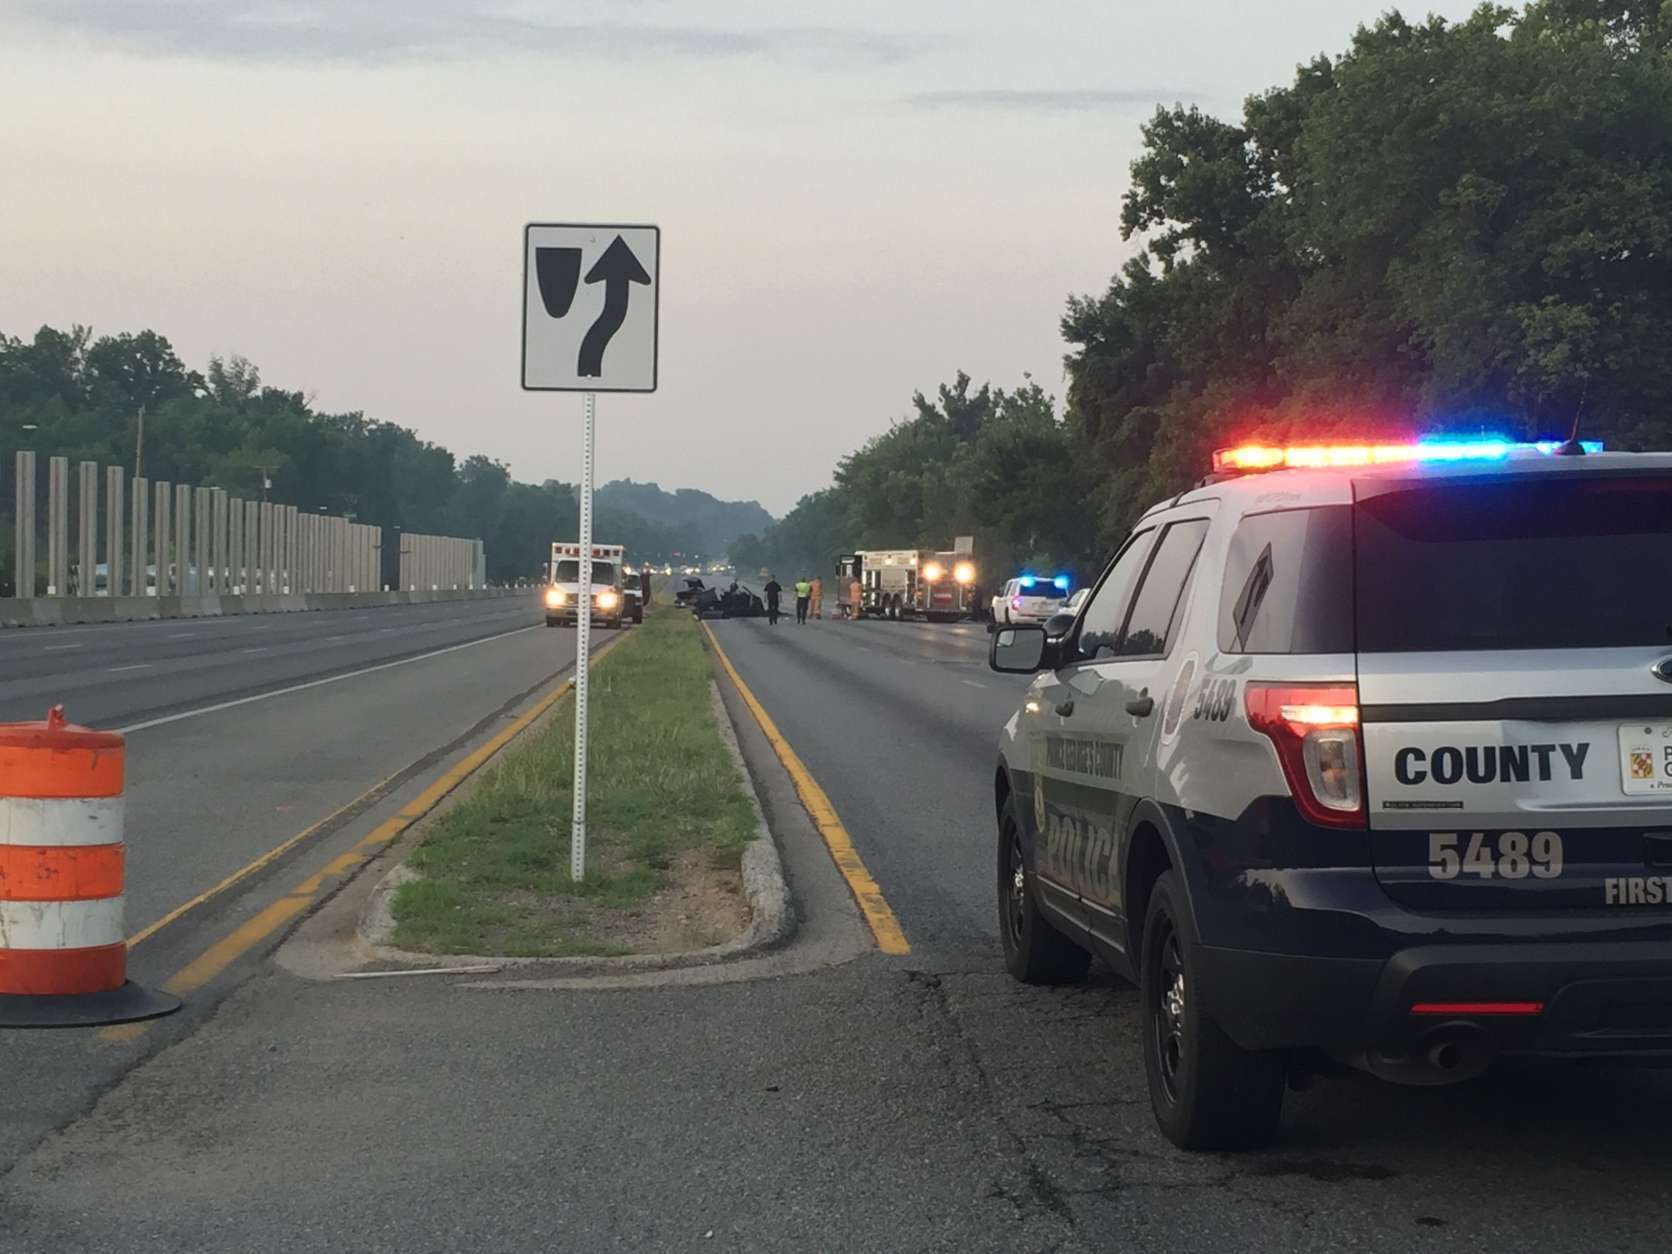 According to Prince George’s County police, two cars collided head-on in the southbound lanes of the highway at around 2:30 a.m. Friday, just north of Palmer Road. (WTOP/Dennis Foley) 